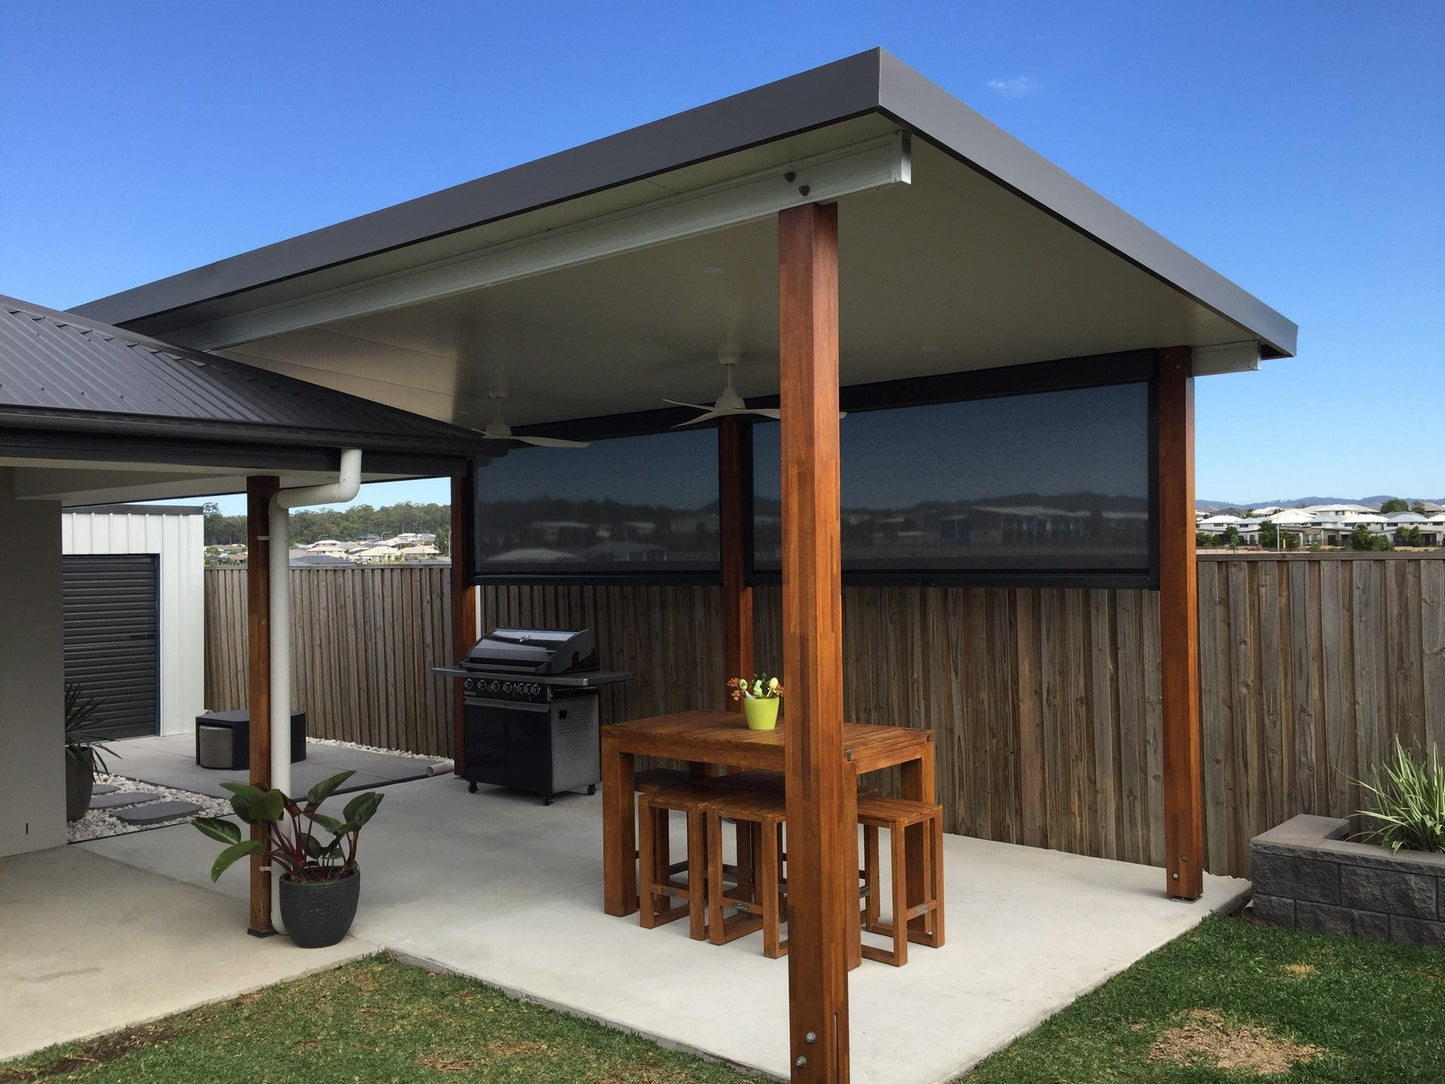 Insulated Flyover Patio Roof- 14m x 9m- Supply & Install QHI National